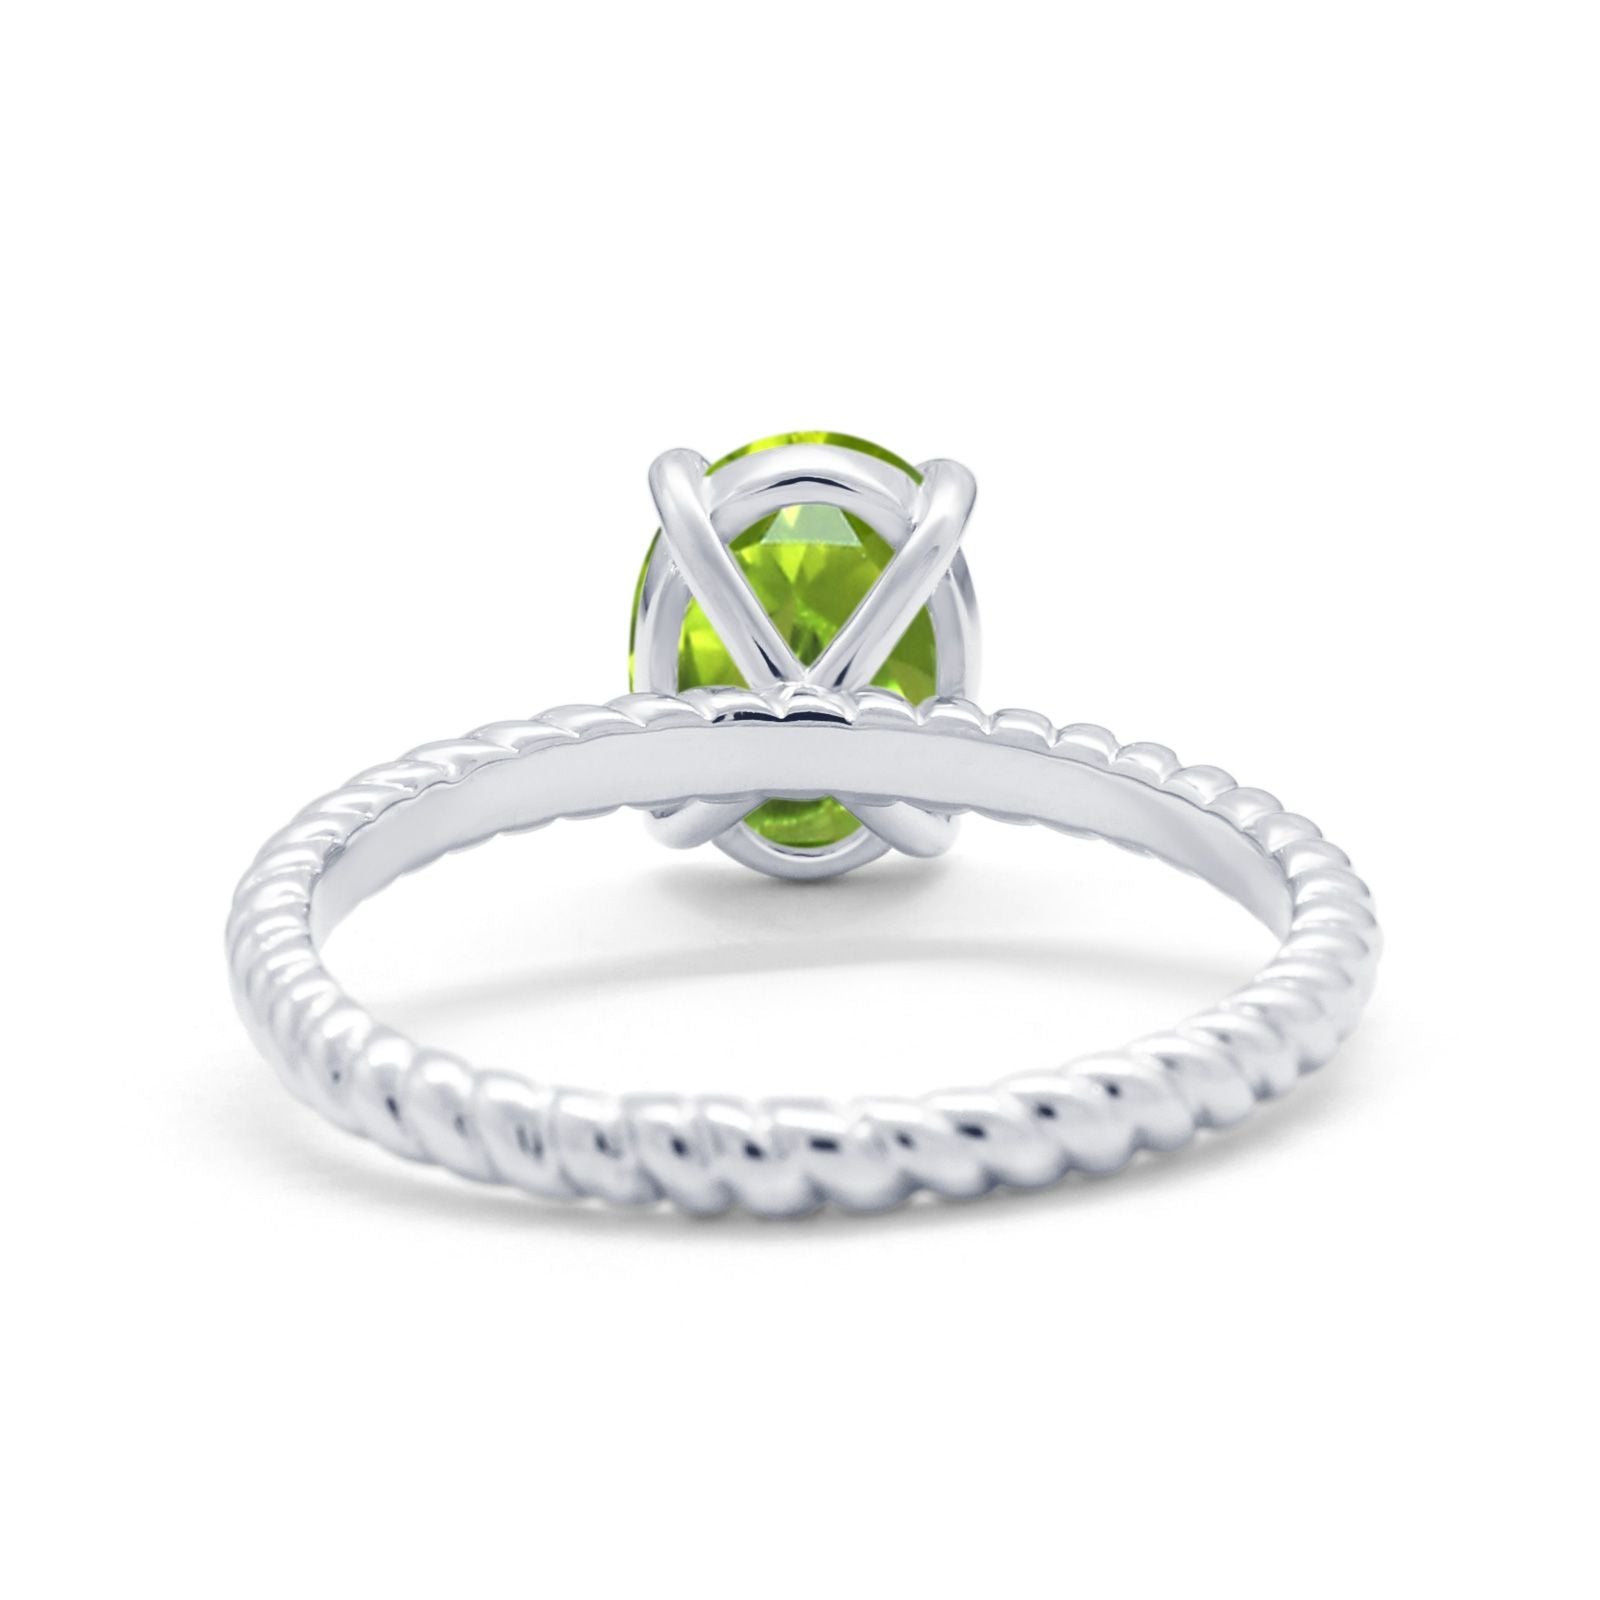 Solitaire Braided Engagement Ring Simulated Cubic Zirconia 925 Sterling Silver